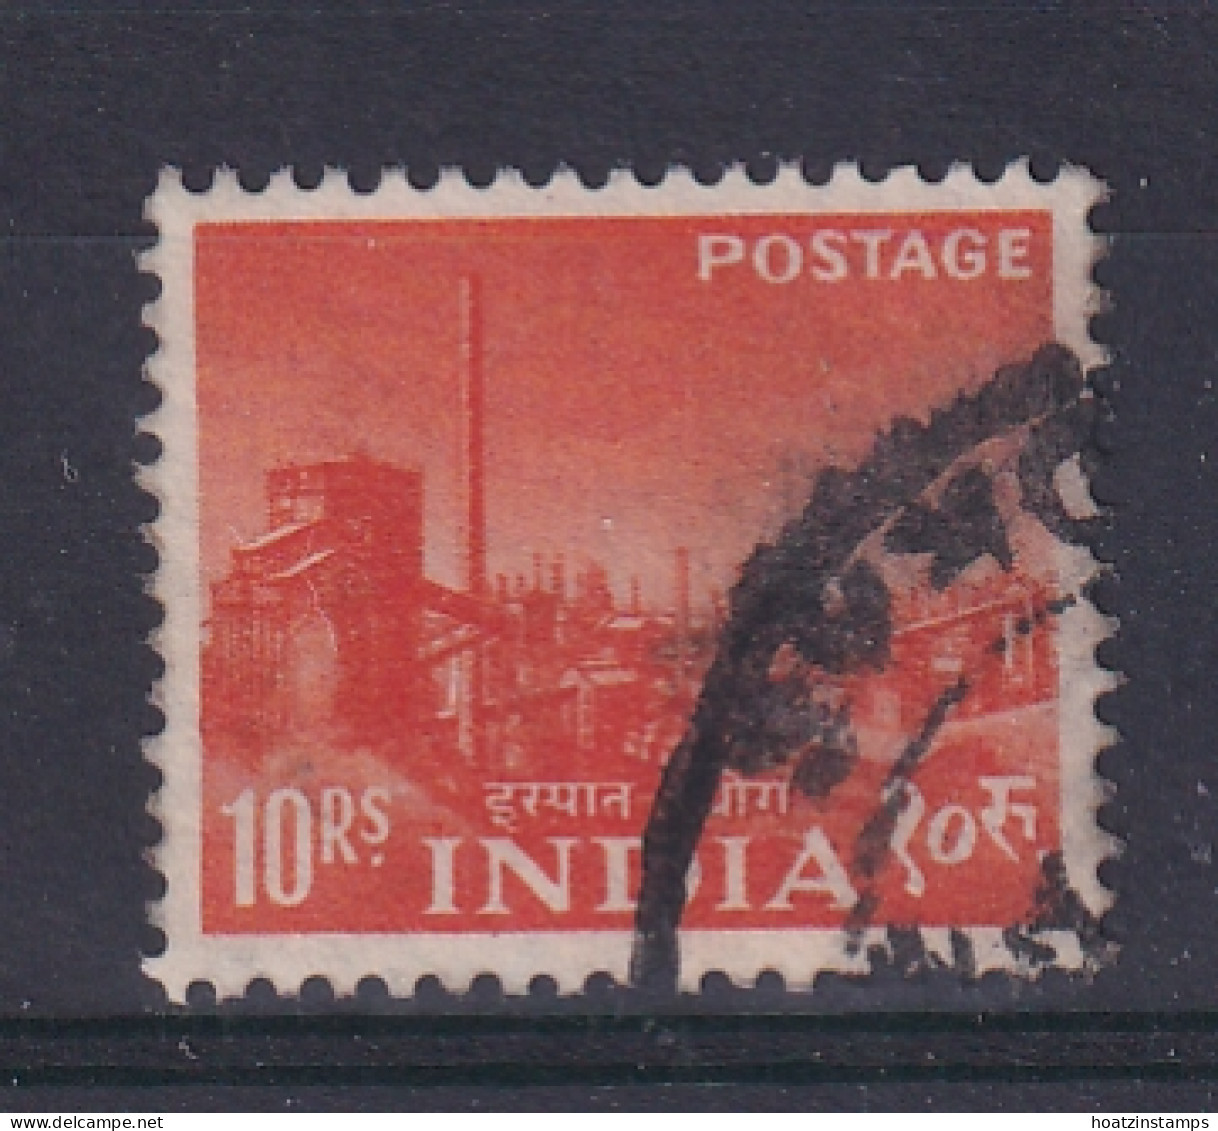 India: 1955   Five Year Plan    SG371     10R     Used - Oblitérés